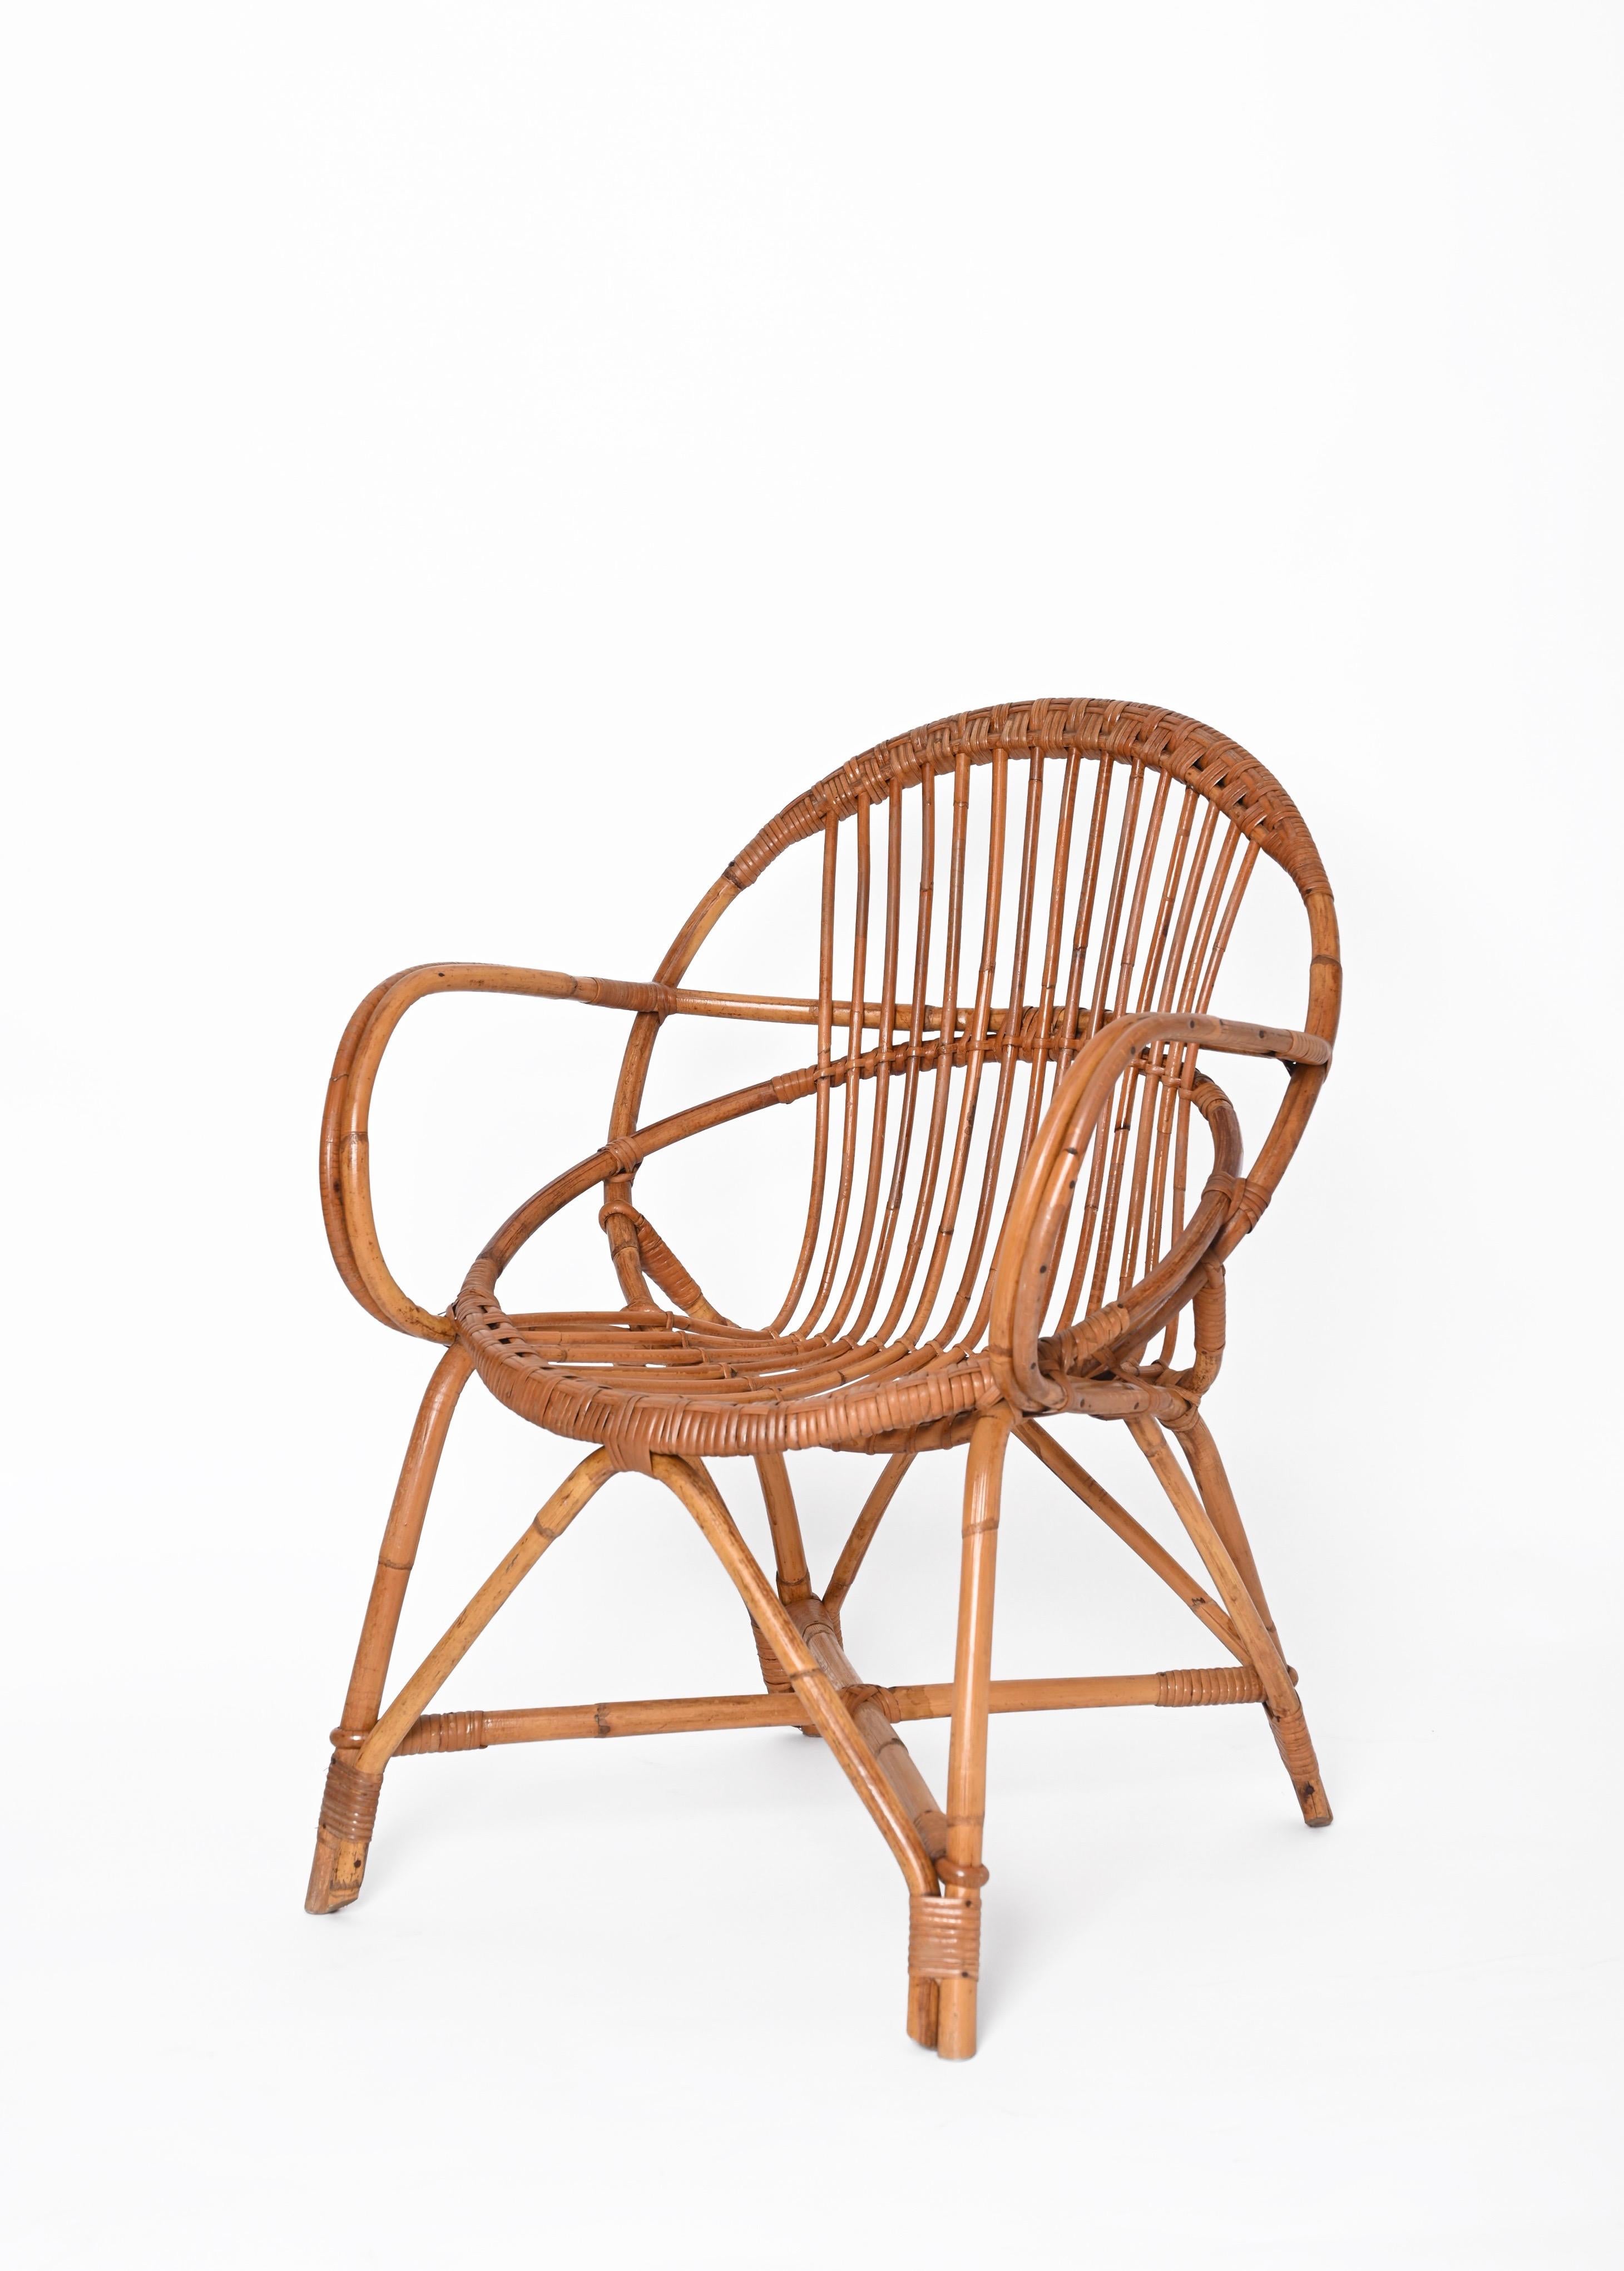 Midcentury Franco Albini Rattan and Bamboo Shell-Shaped Armchair, Italy, 1950s For Sale 3